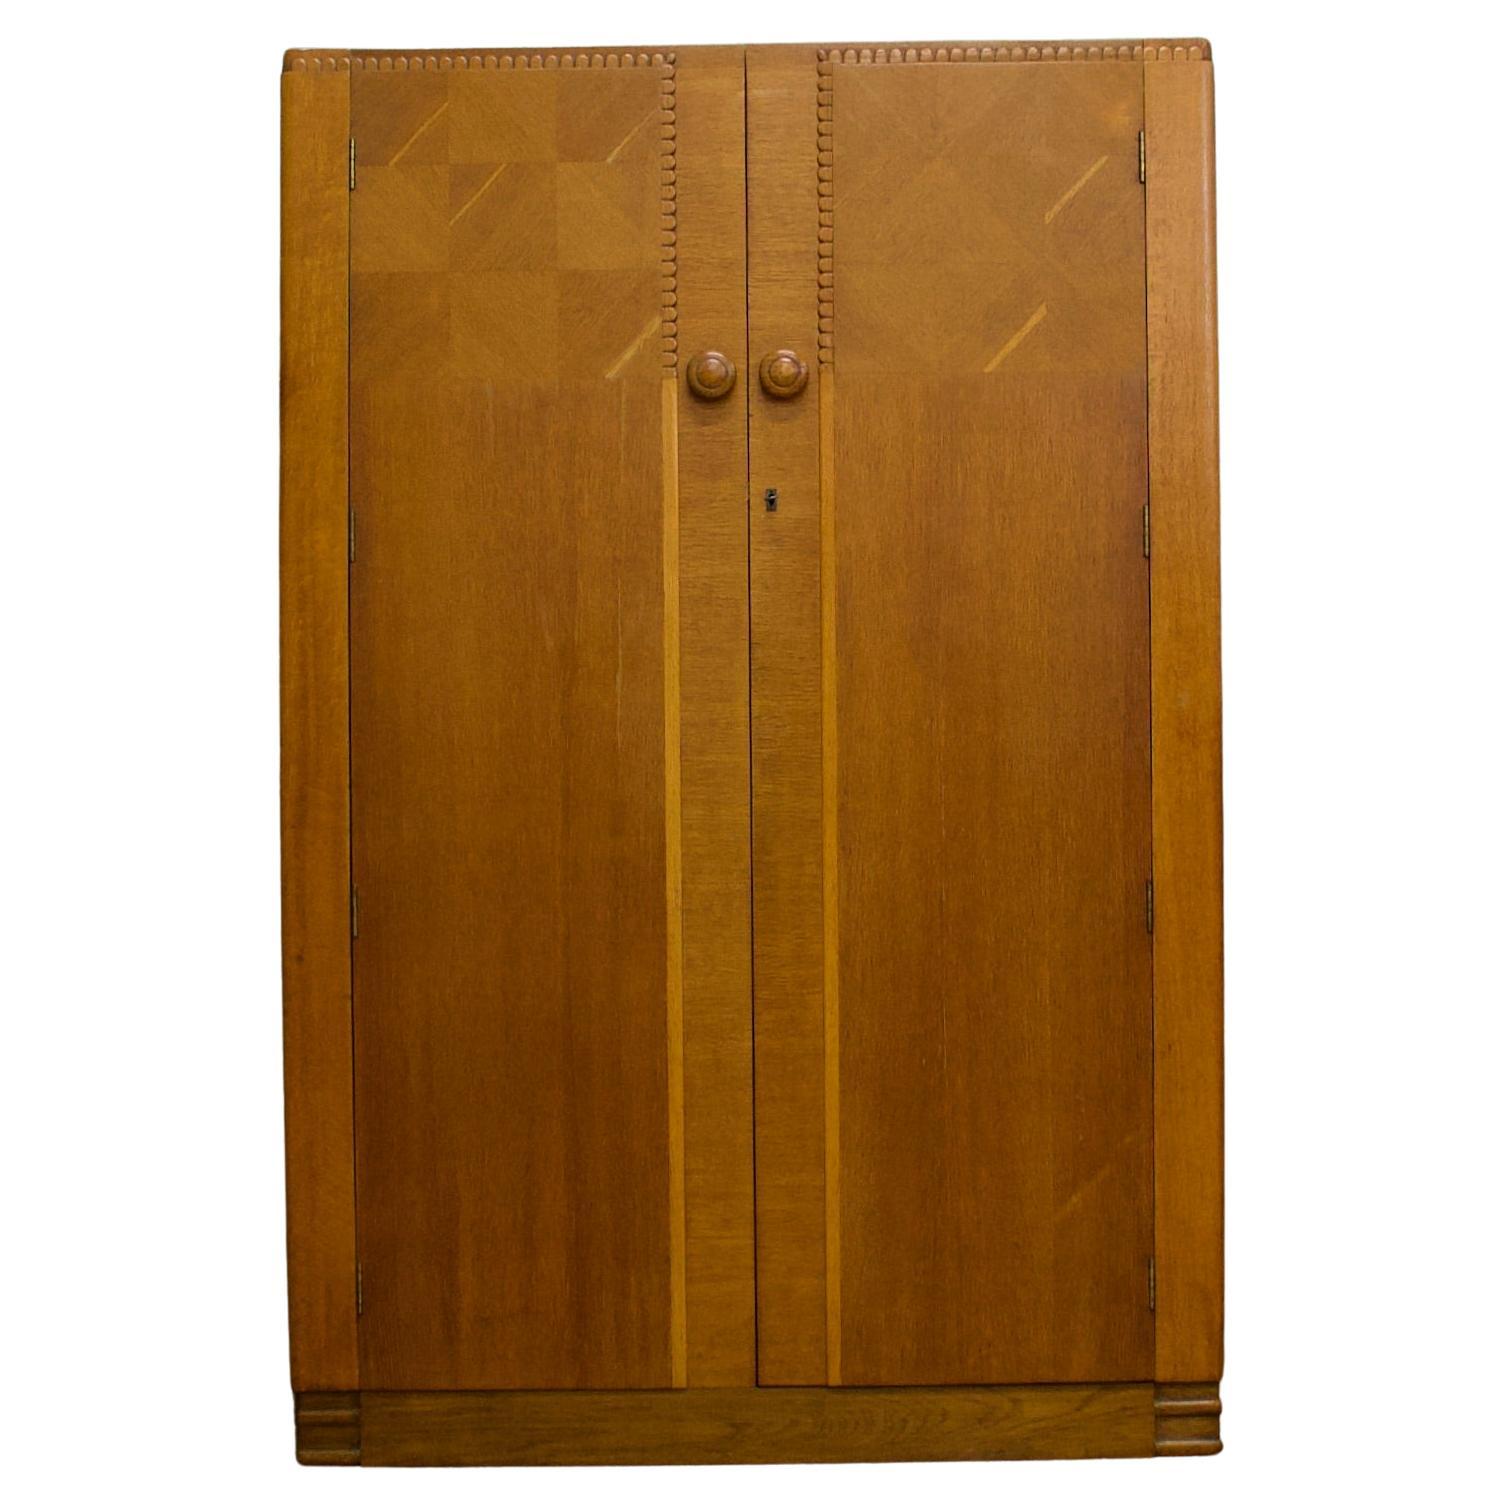 A beautiful quality and tone, Art Deco freestanding oak wardrobe
Featuring a shelves and a hanging rail 